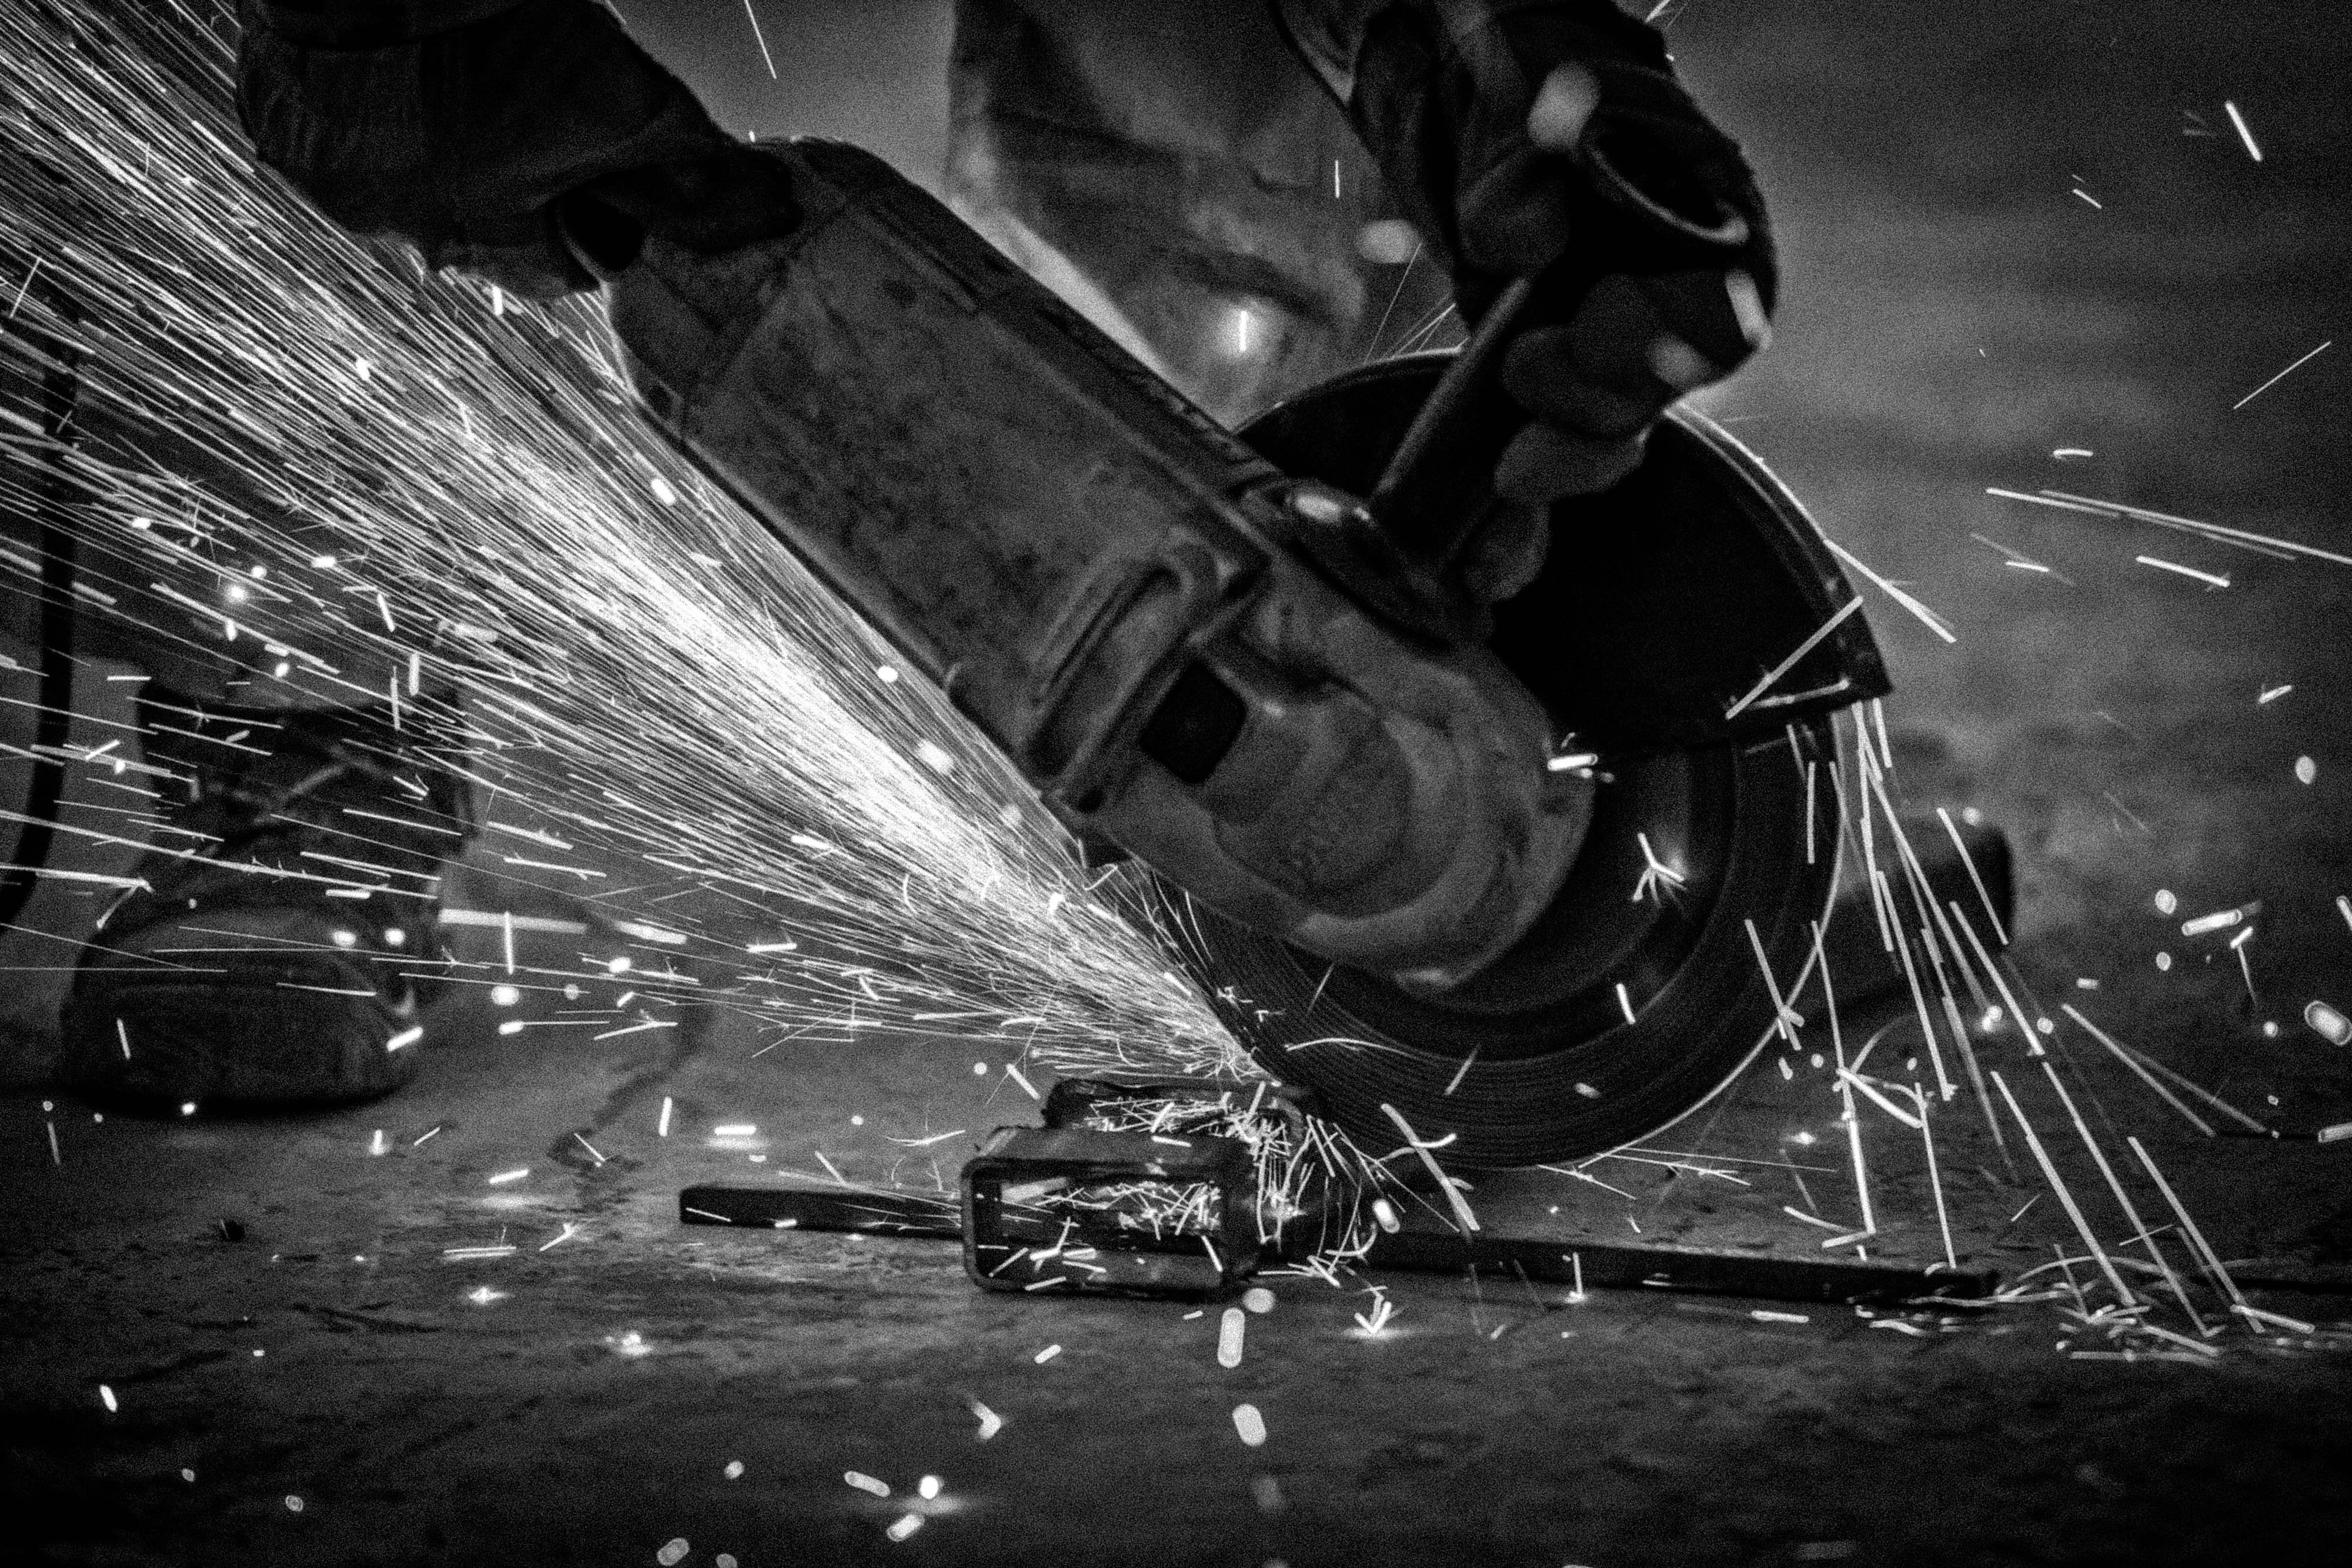 working-with-a-steel-sparkle-dangerous-industrial-industry-working-strong-fire-bright-warm-yellow_t20_mvwdam-36